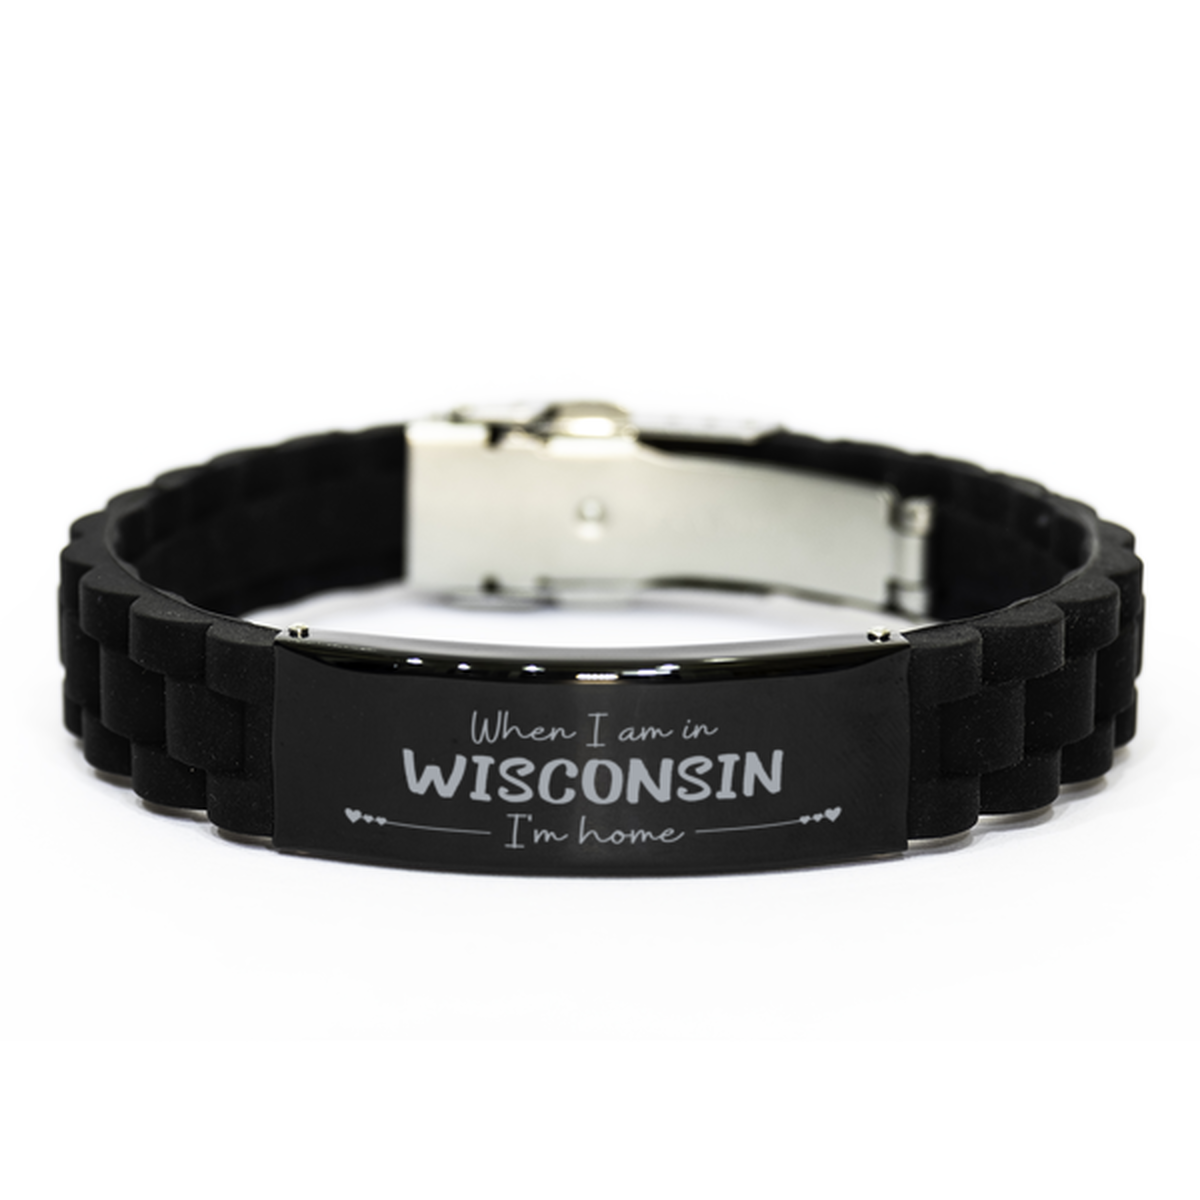 When I am in Wisconsin I'm home Black Glidelock Clasp Bracelet, Cheap Gifts For Wisconsin, State Wisconsin Birthday Gifts for Friends Coworker